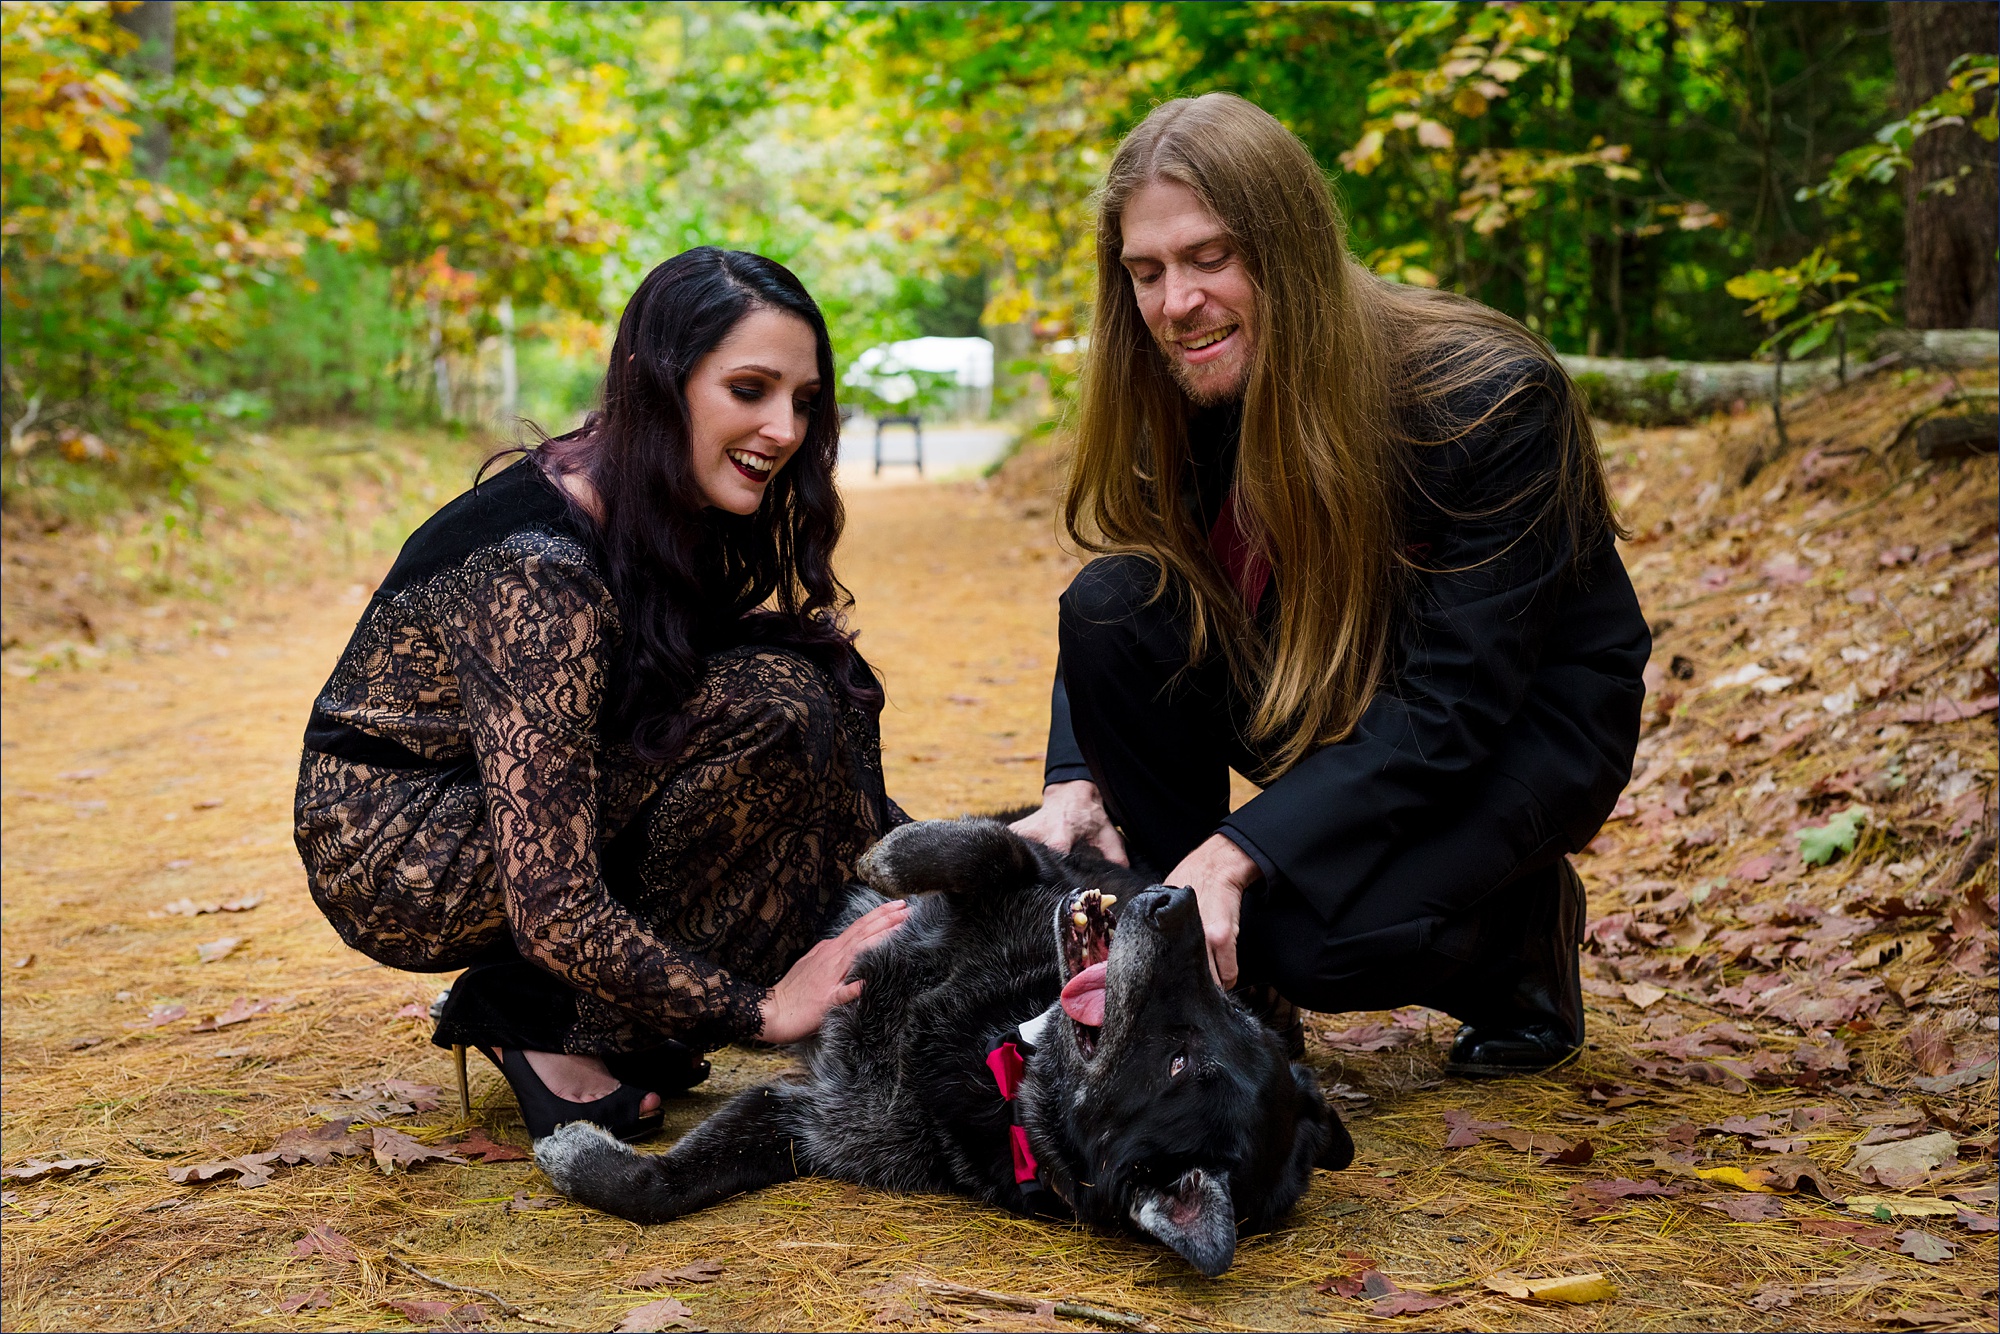 The bride and groom with their dog enjoy the wedding day fun